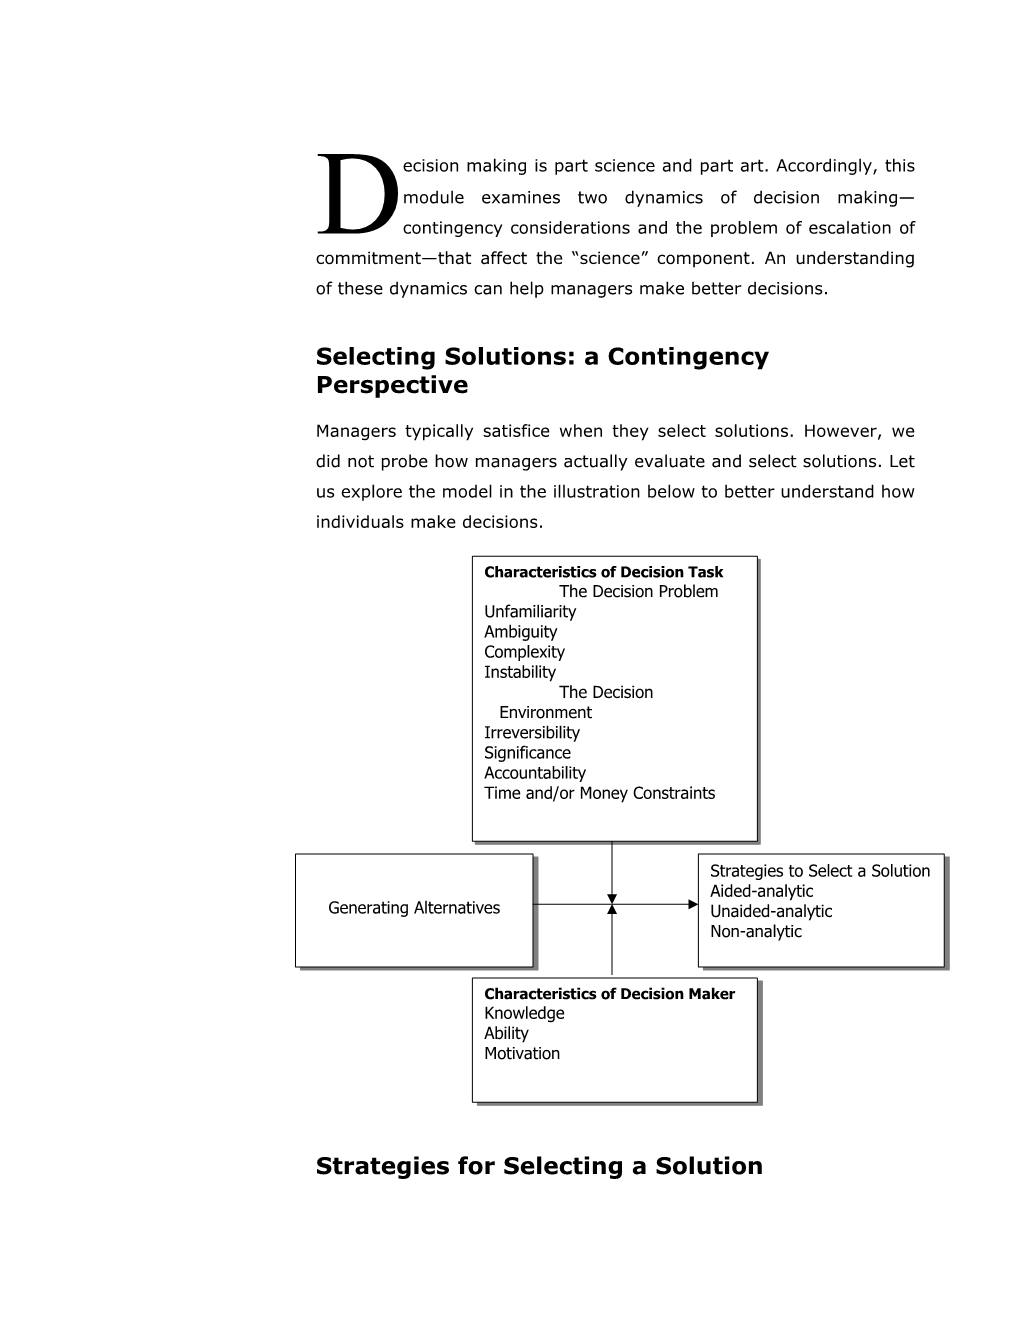 Selecting Solutions: a Contingency Perspective